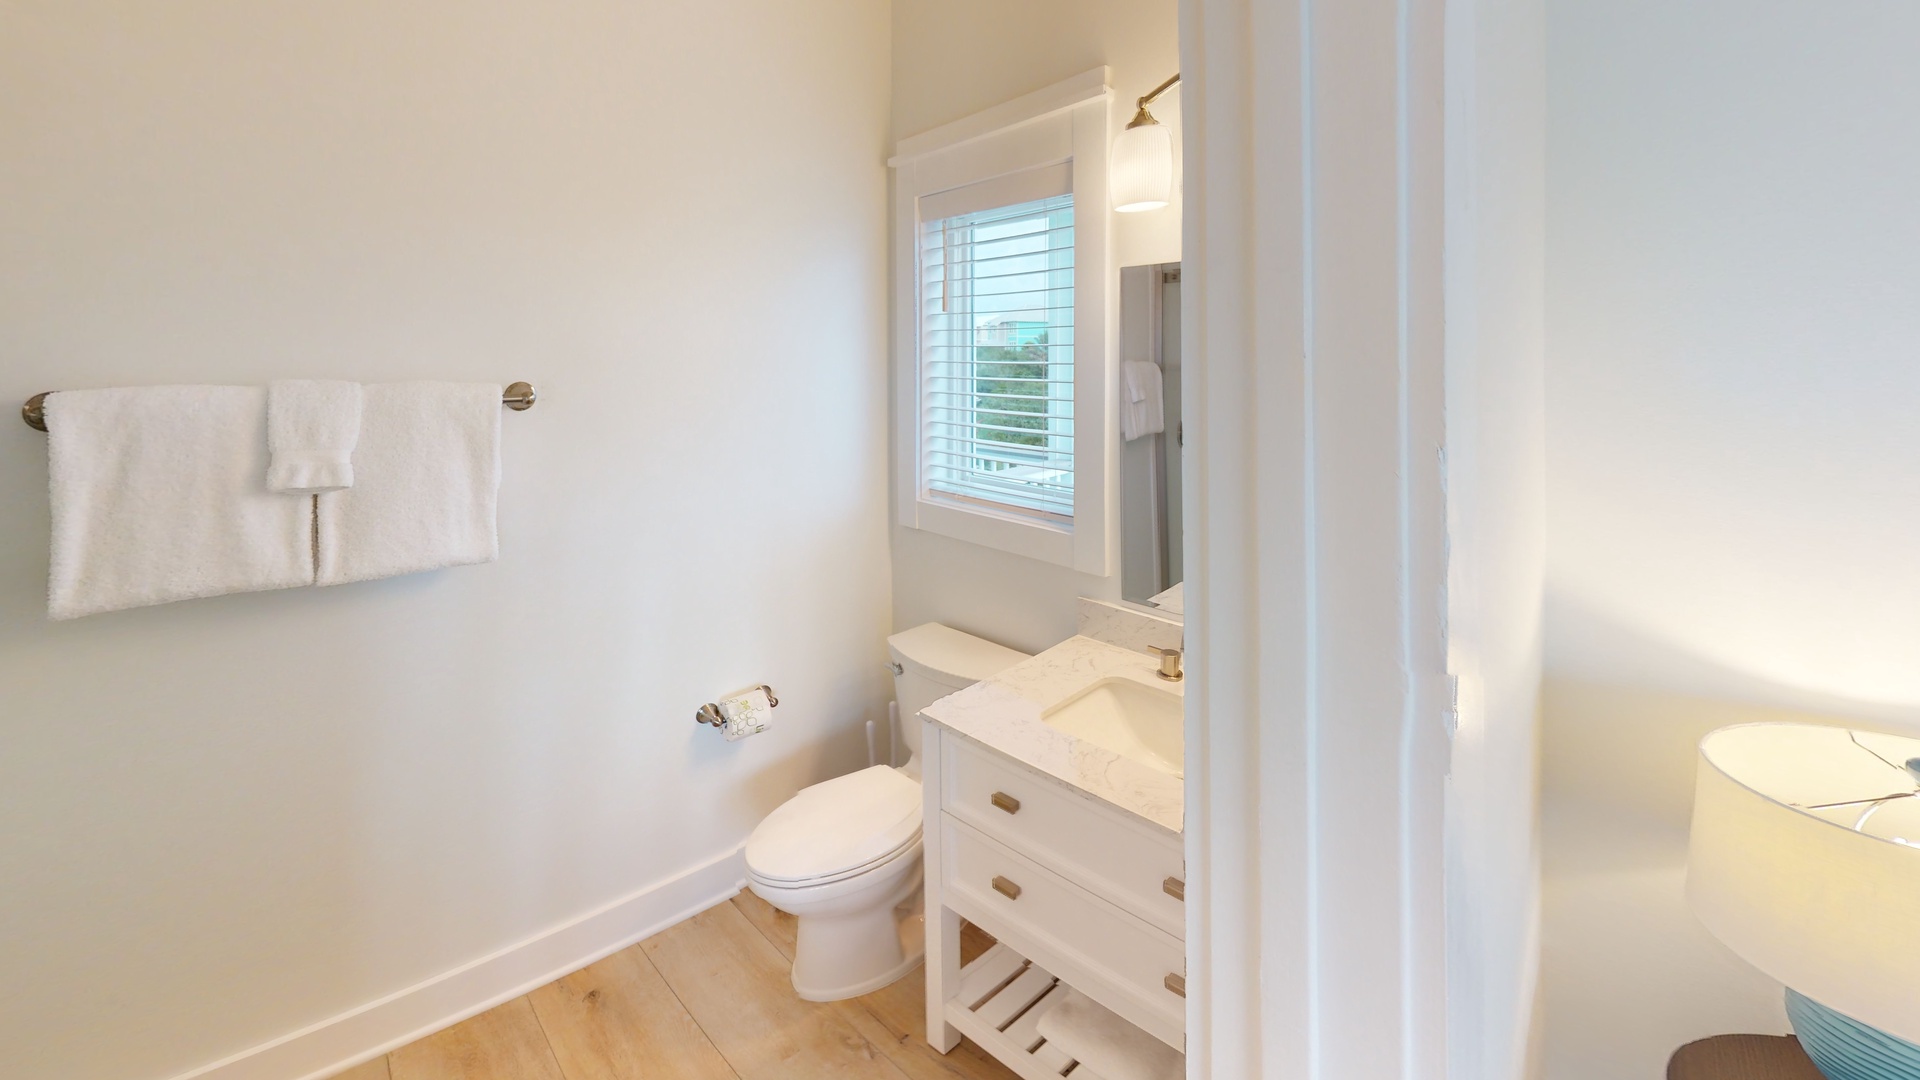 The private bathroom in Bedroom 6 has a walk-in shower